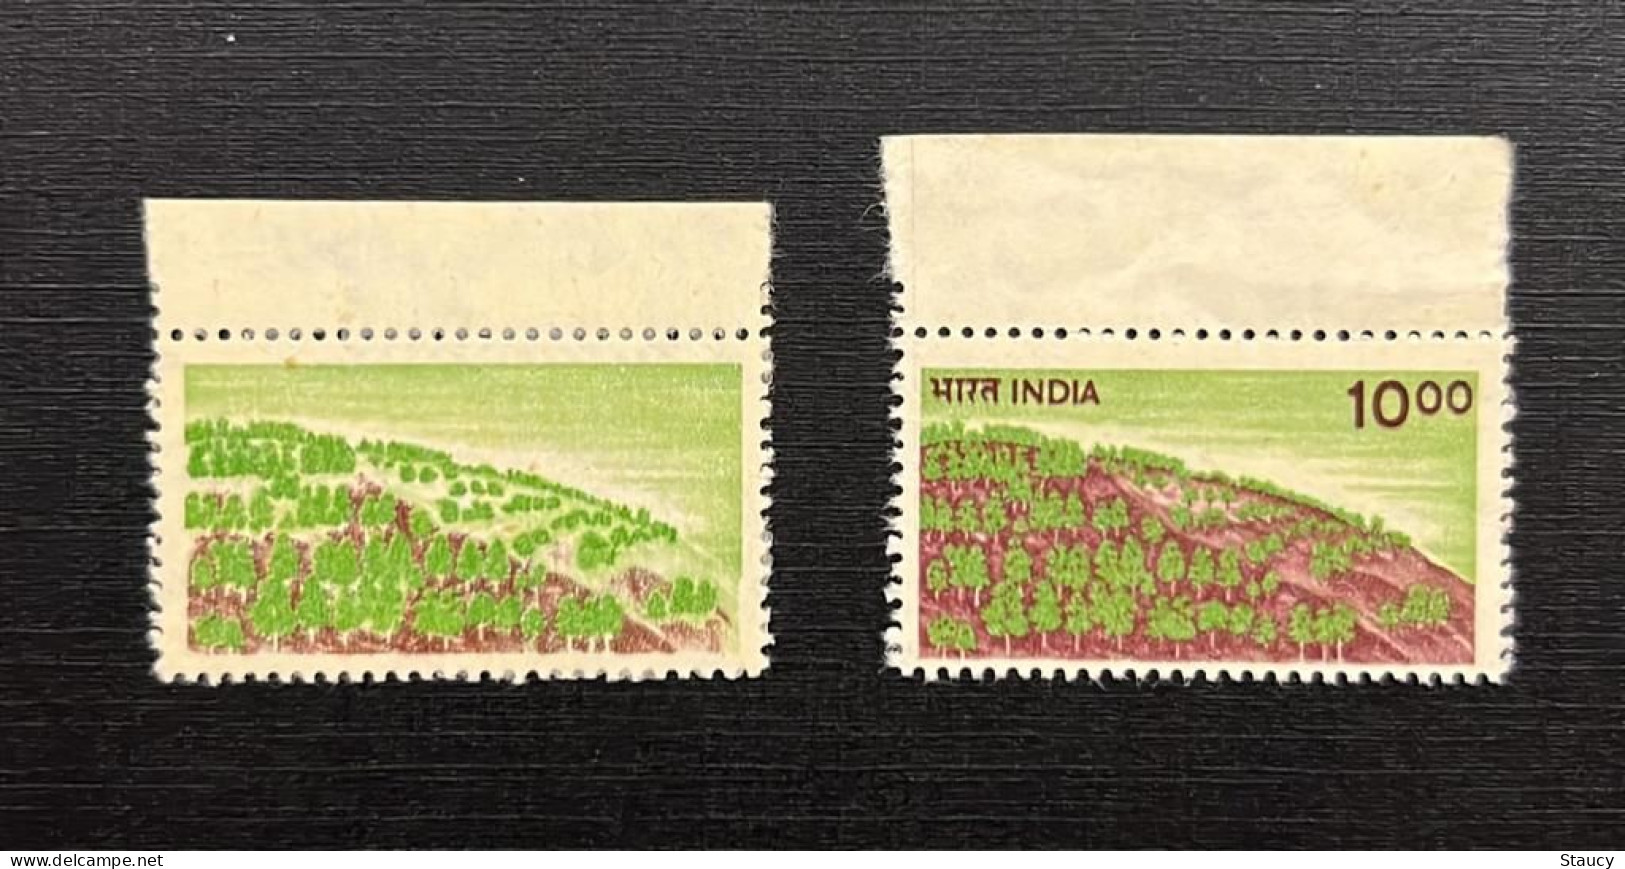 India 1988 Error 6th Definitive Series, Rs.10  Afforestation / Tree Error "partly BROWN COLOUR OMMITTED" MNH As Per Scan - Errori Sui Francobolli